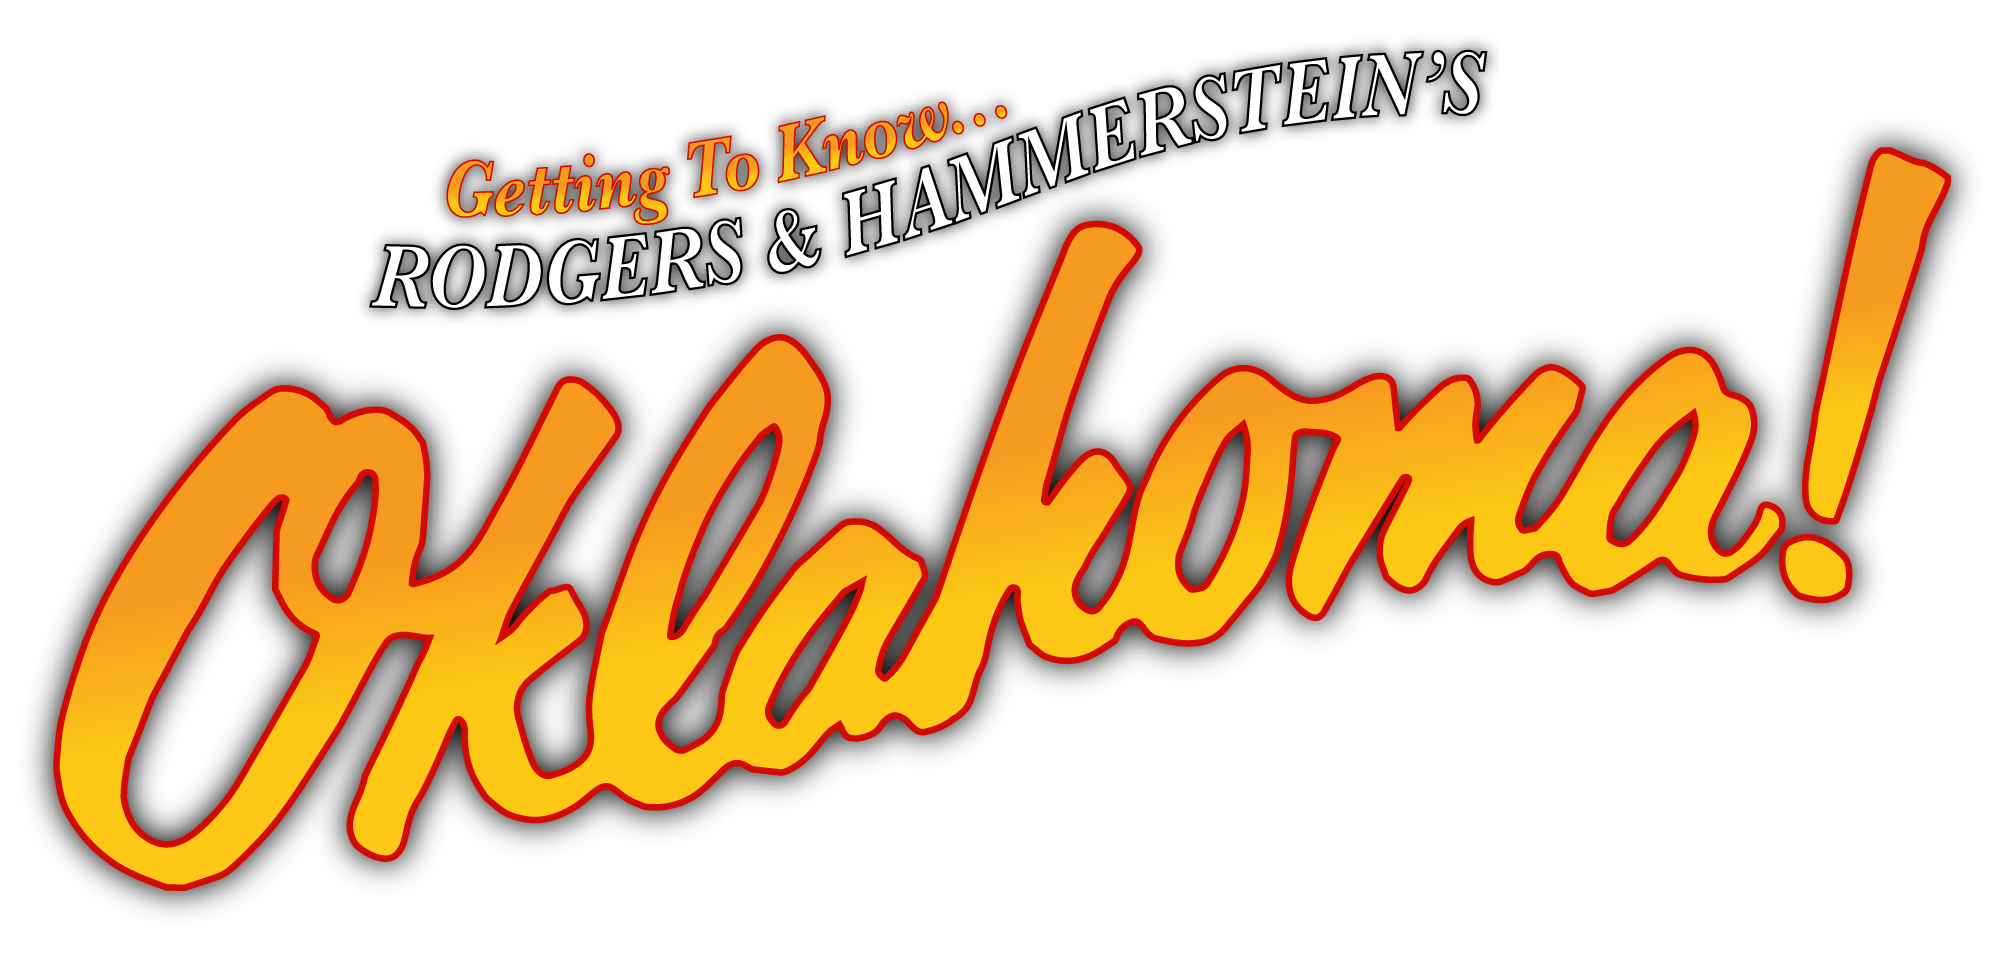 Getting To Know ... Rodgers & Hammerstein's Oklahoma!